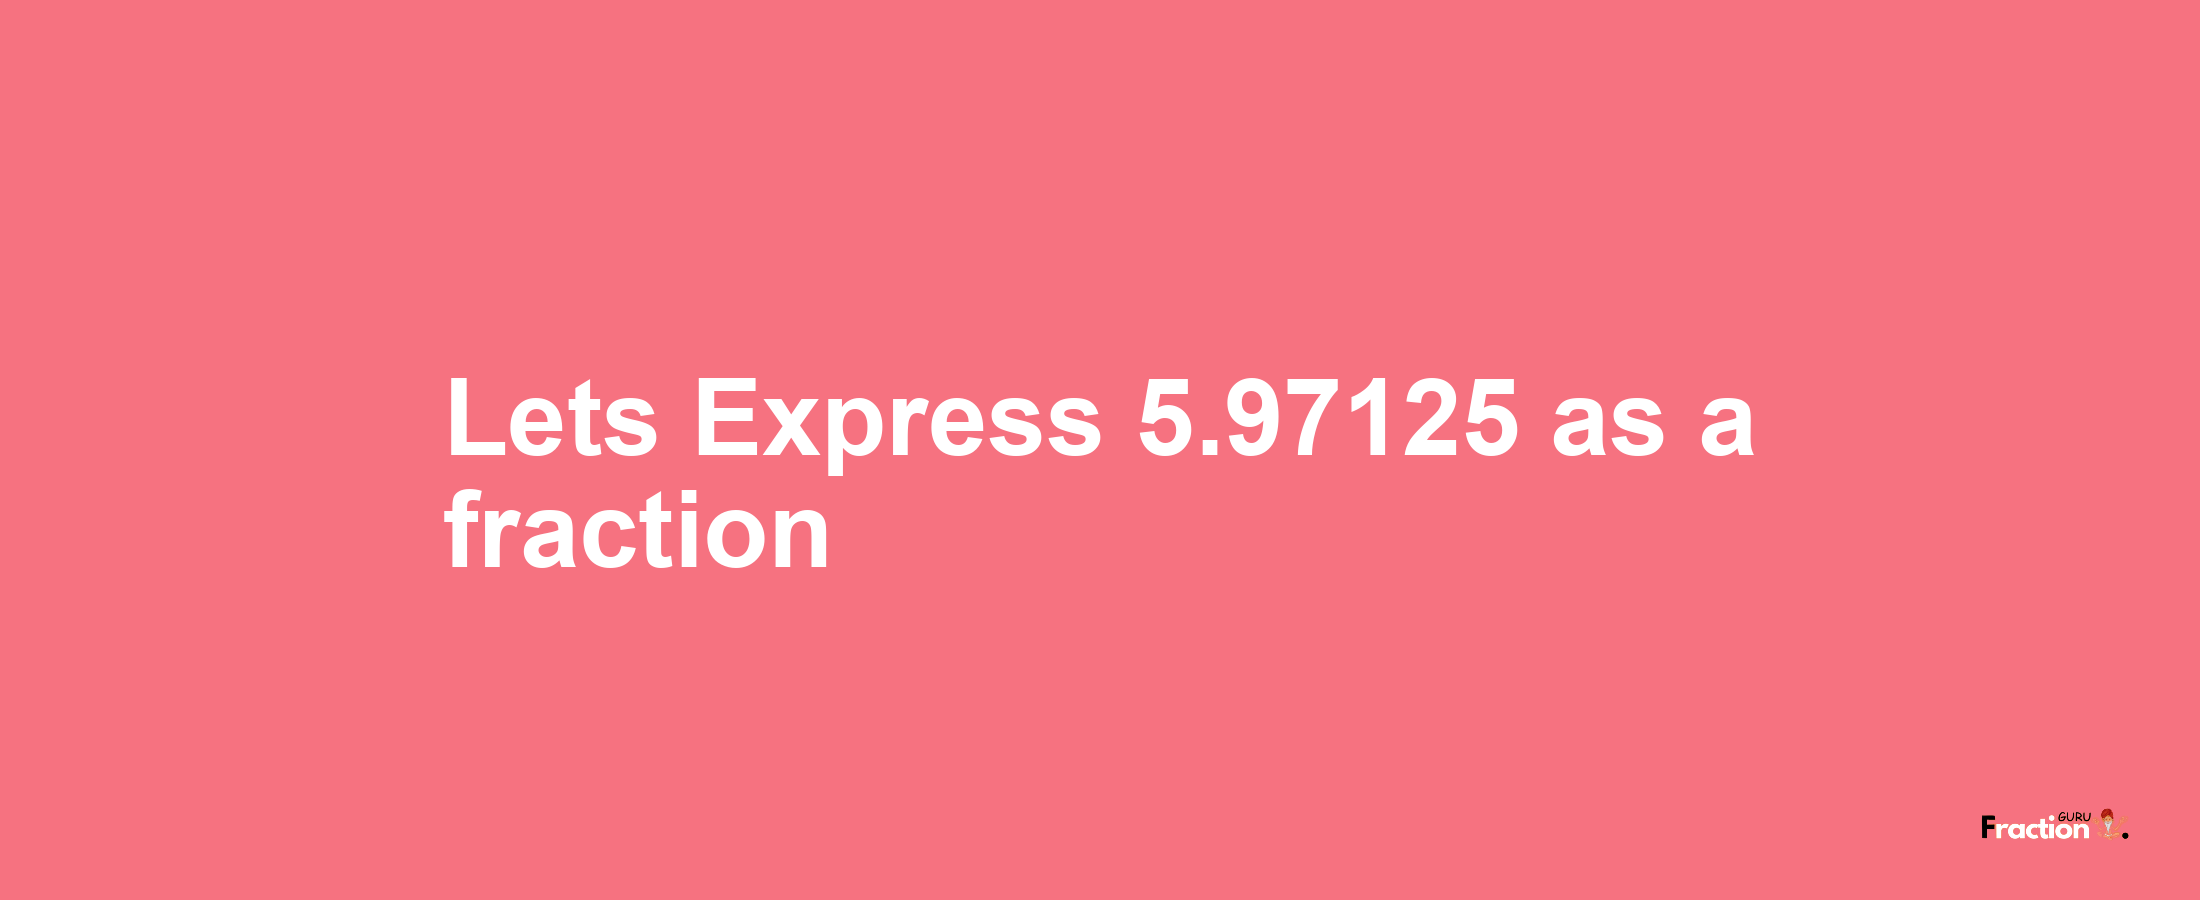 Lets Express 5.97125 as afraction